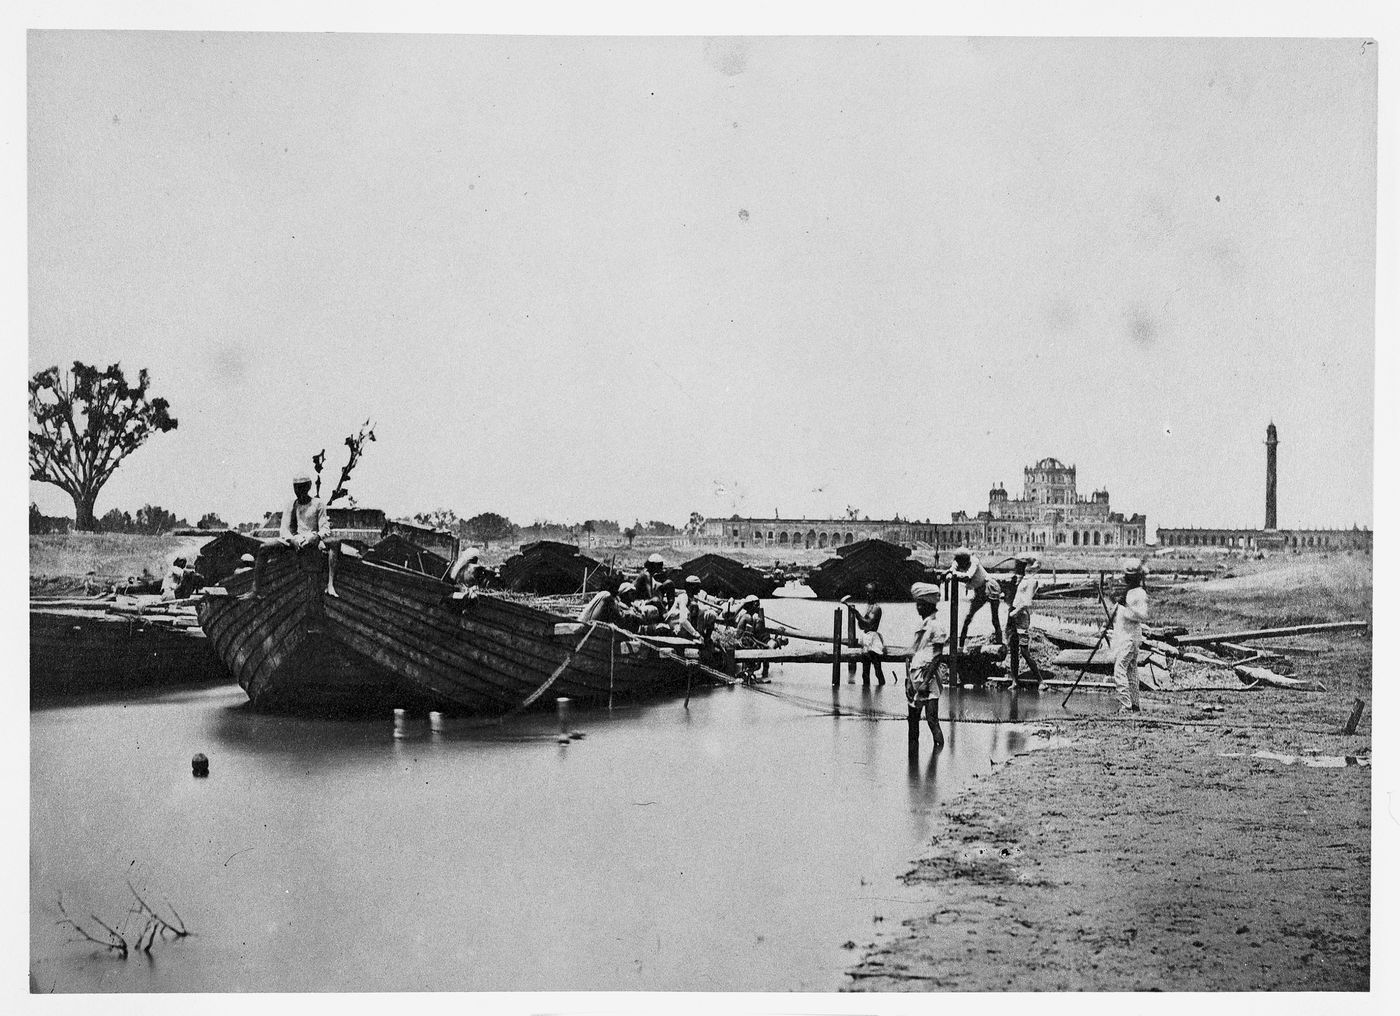 View of a bridge of boats across the Jumna River (now the Yamuna River) showing La Martinière College in the background, Lucknow, India